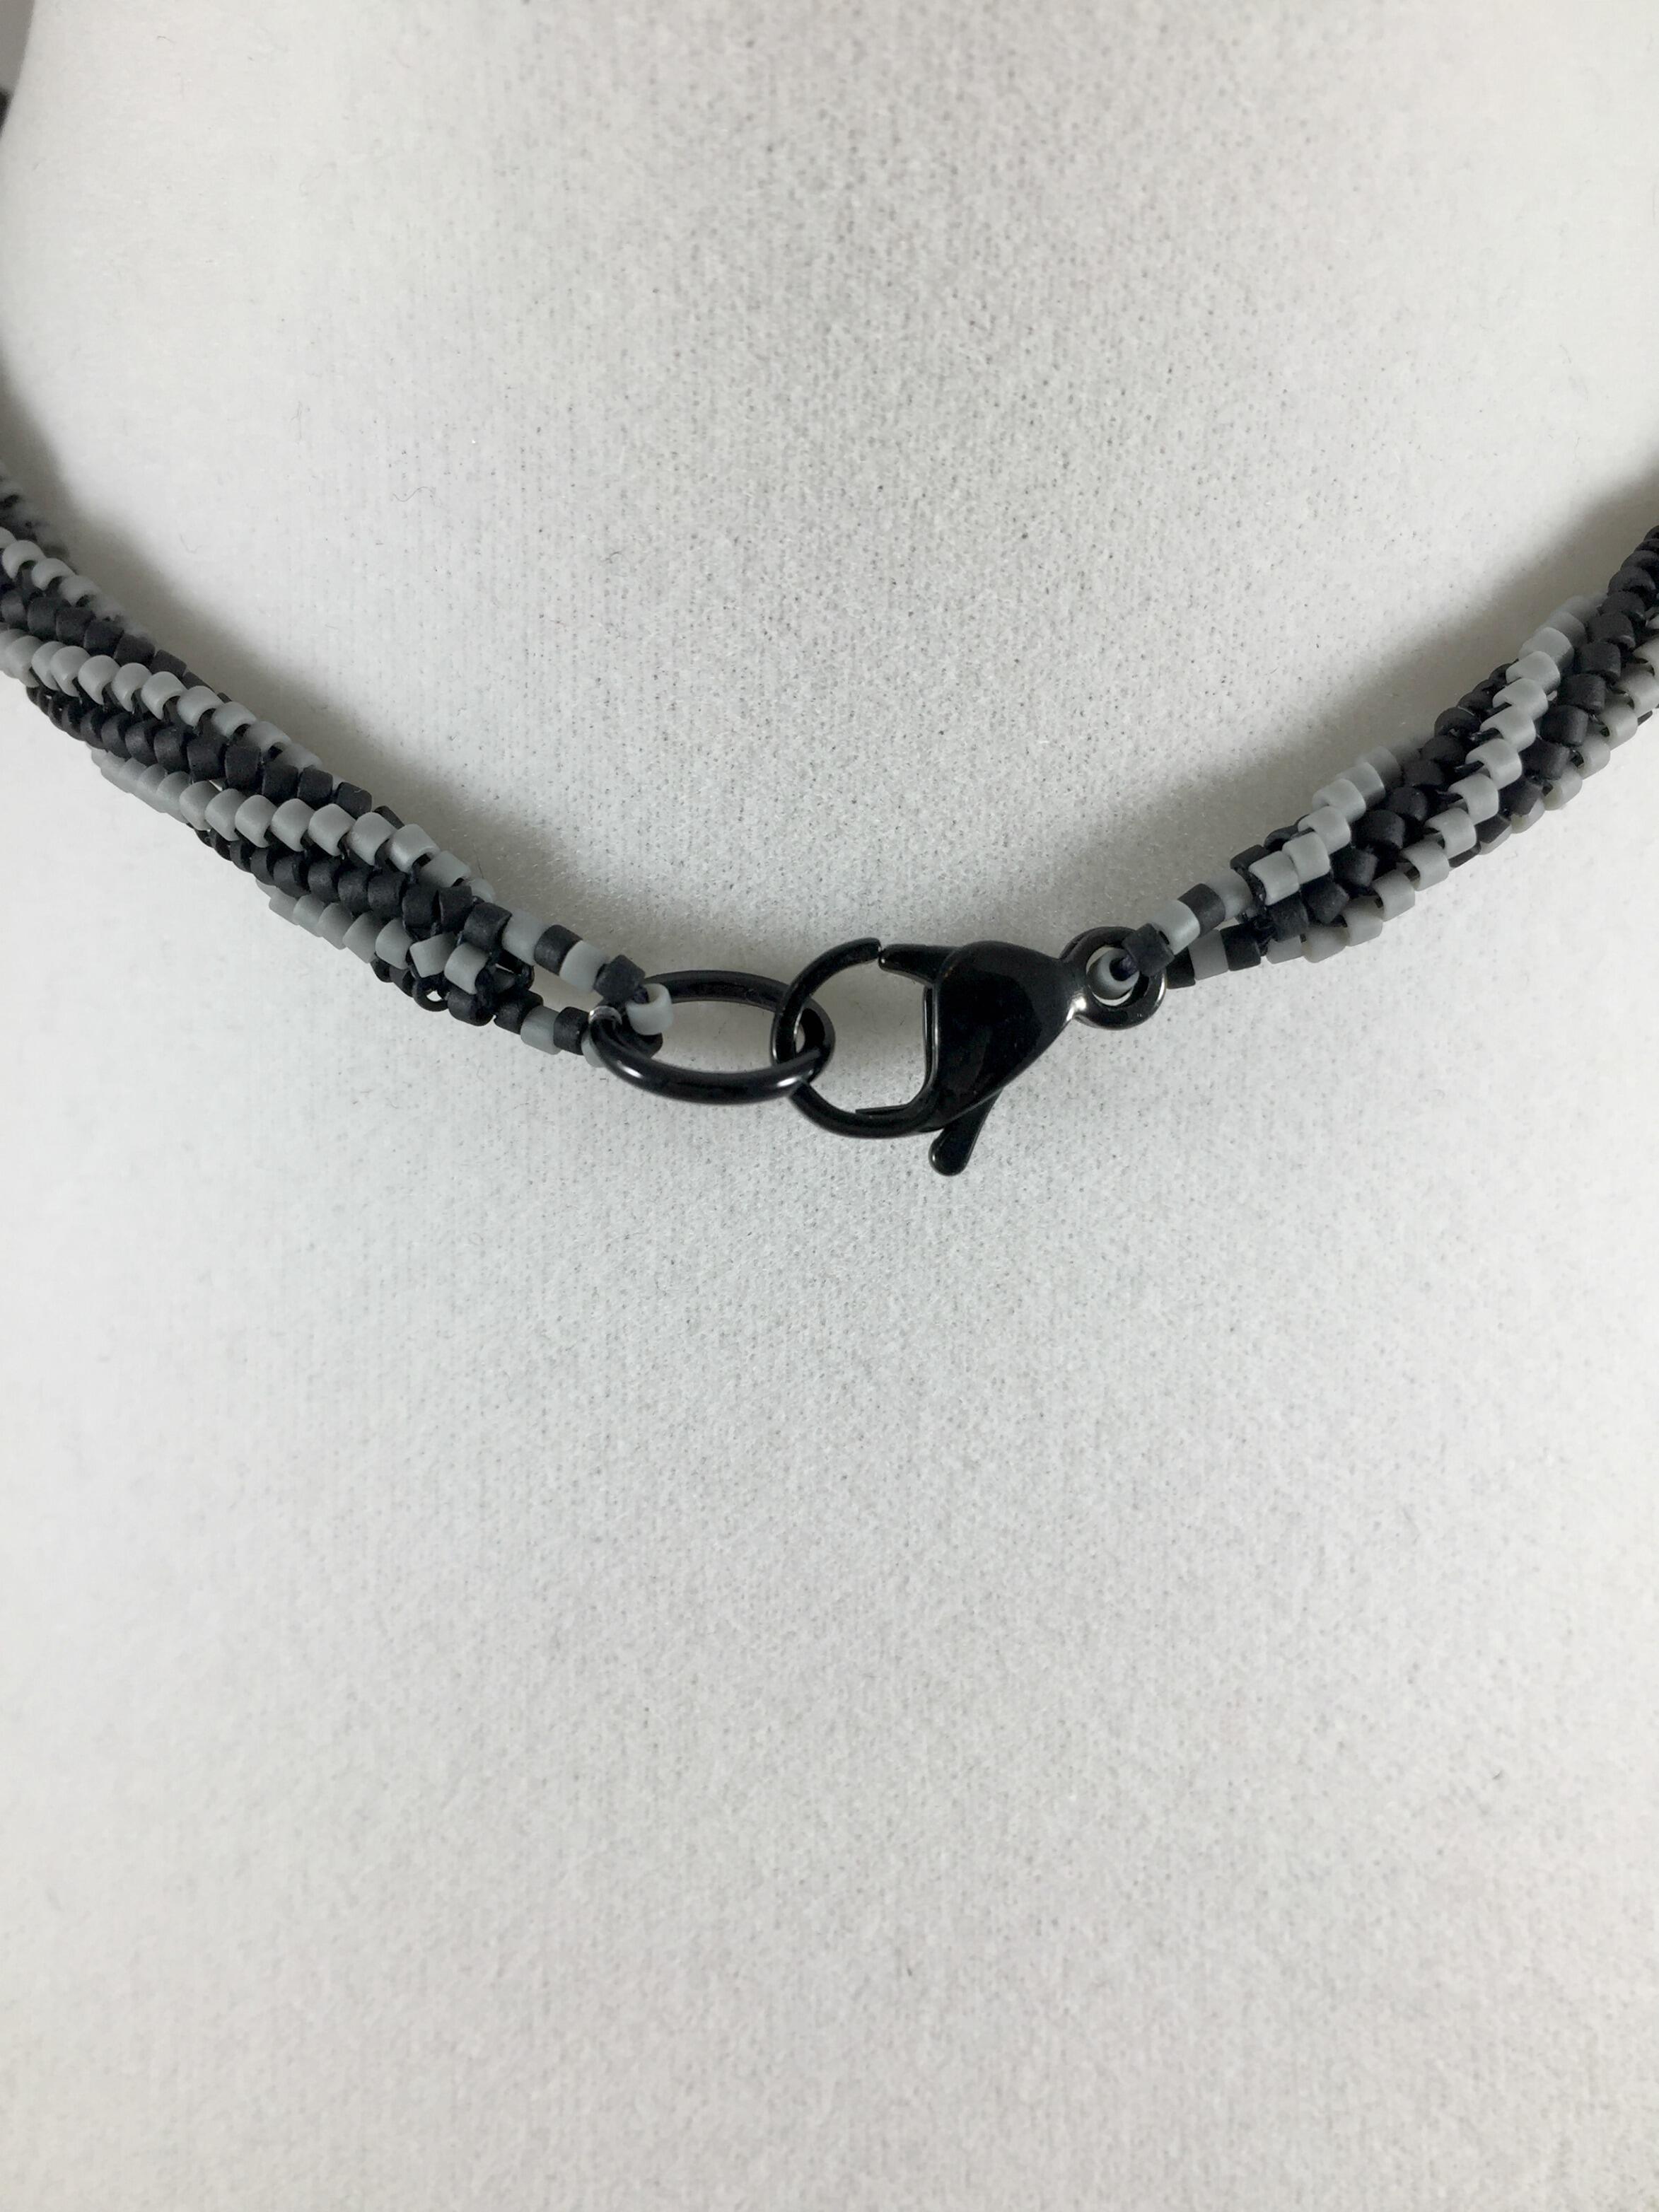 Close up image of black stainless steel lobster claw clasp on black and grey beaded necklace